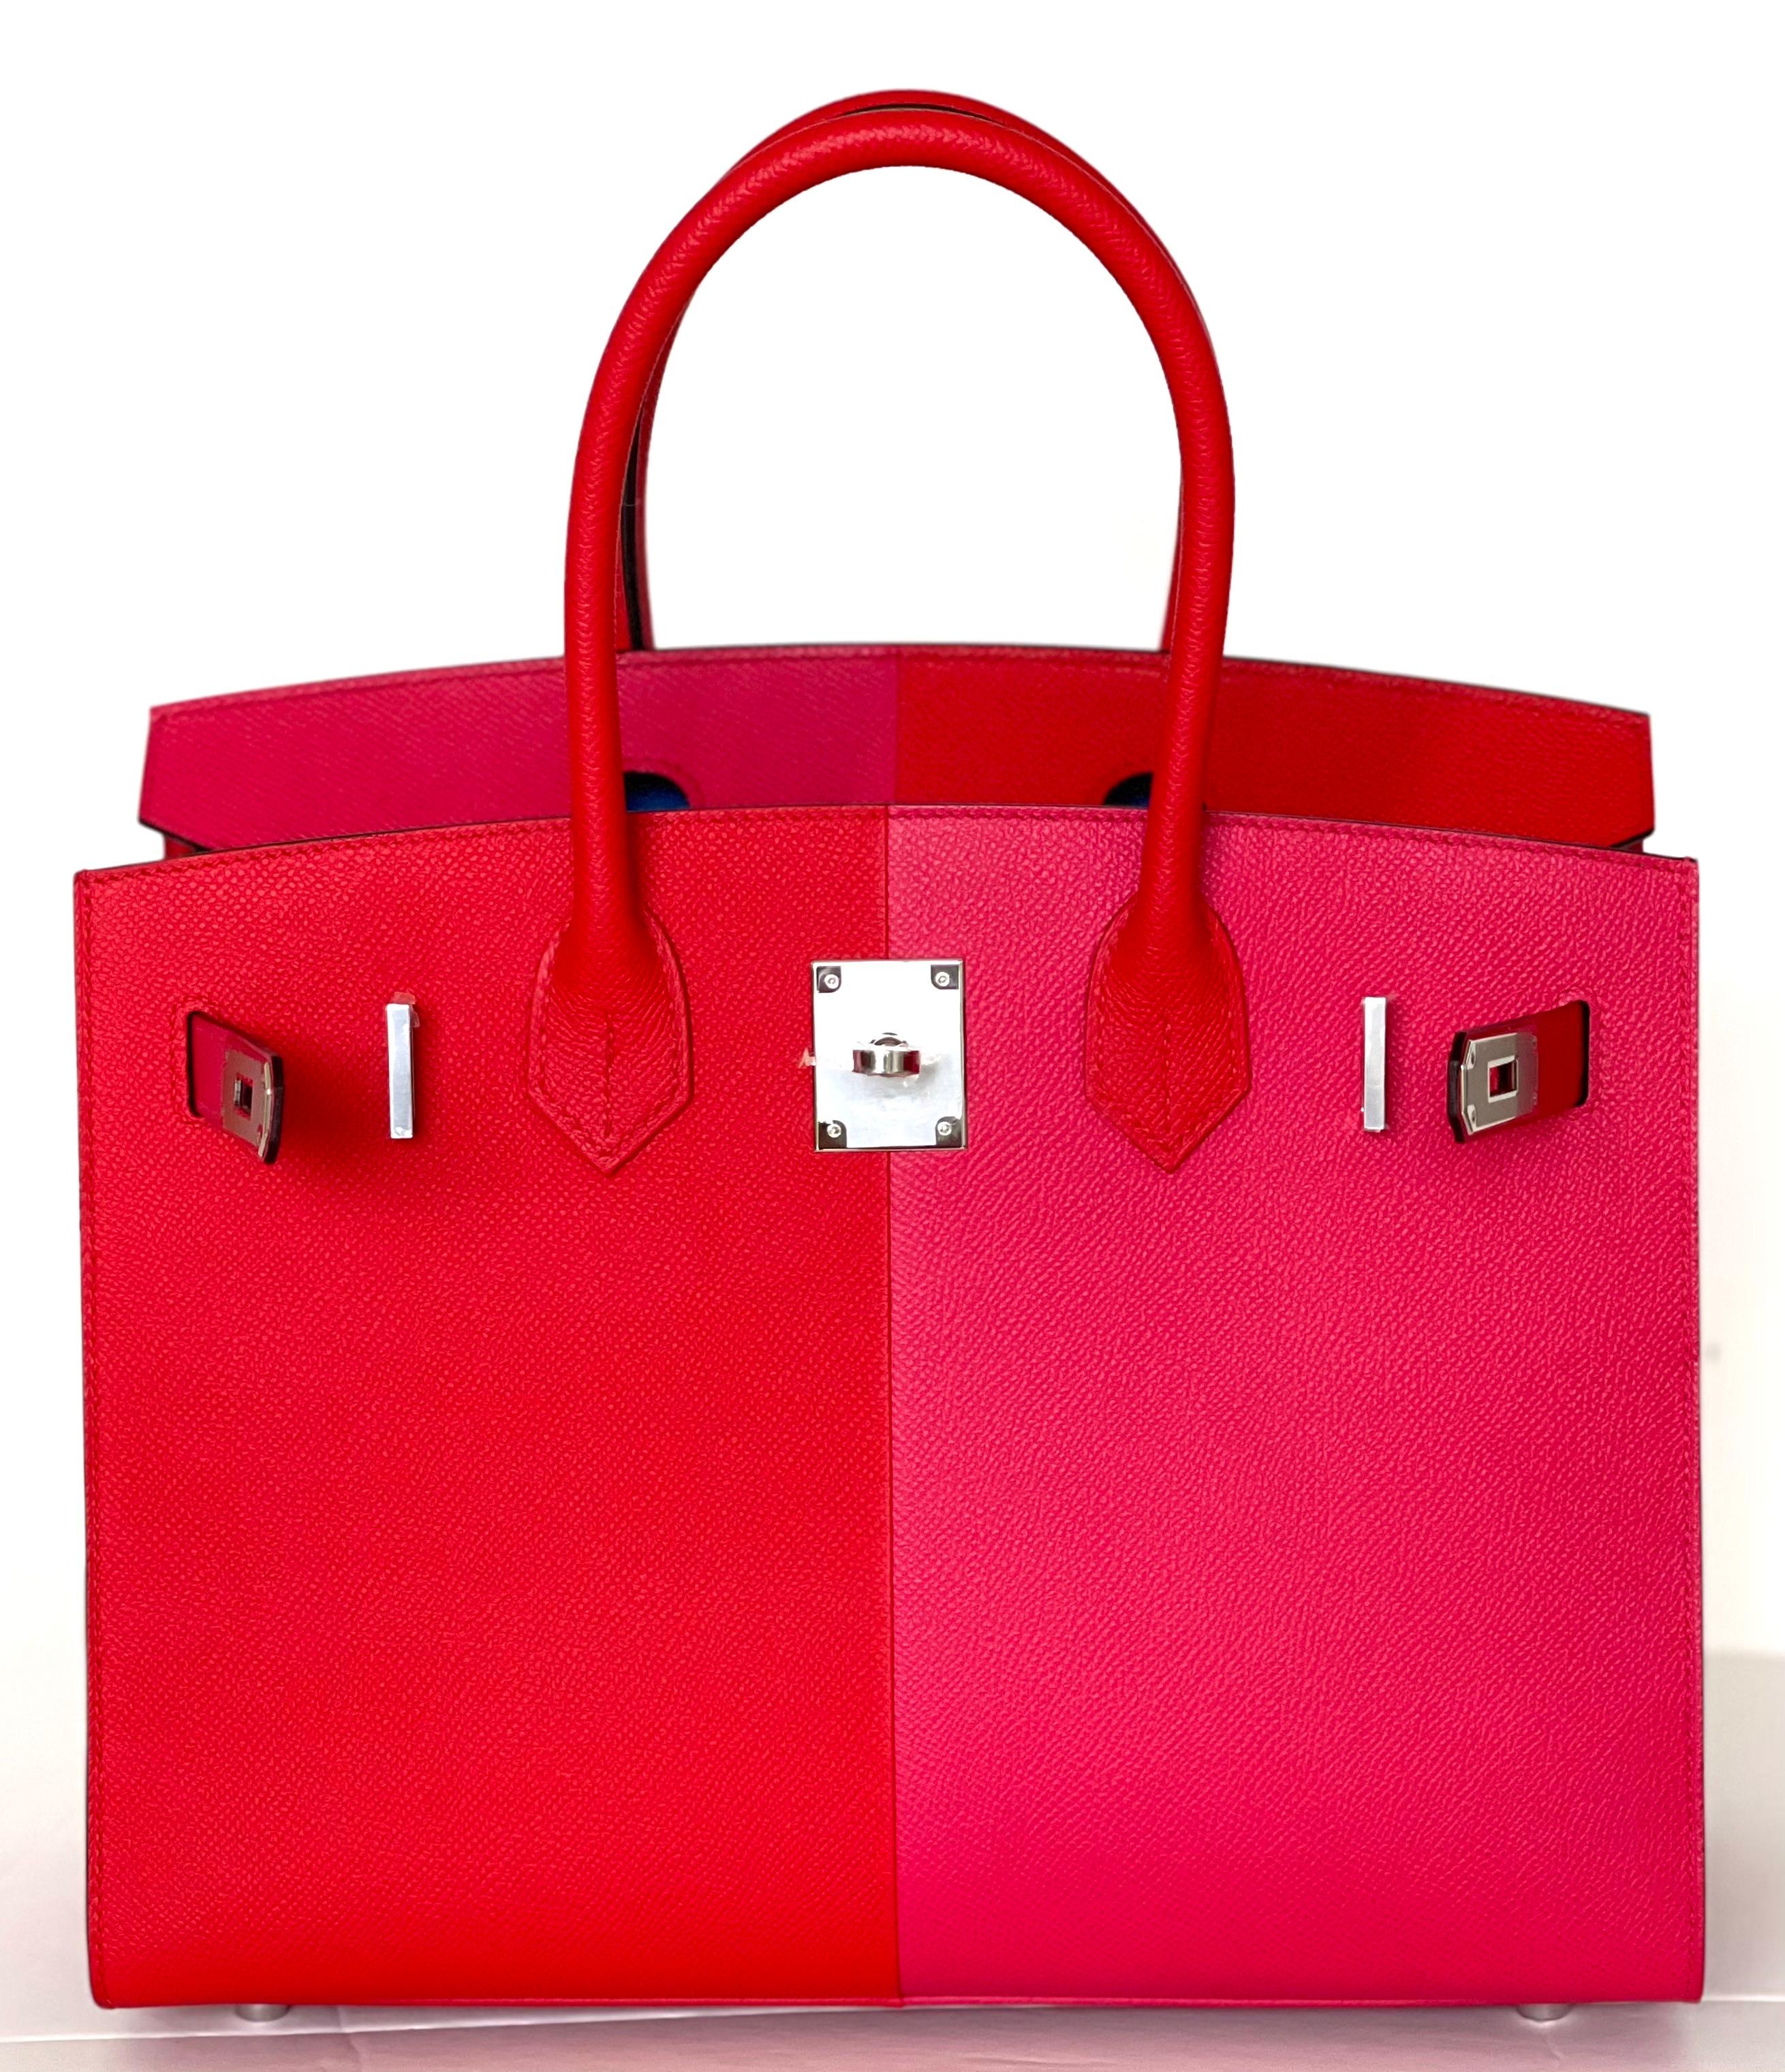 This Special Birkin is Sellier Style, with the stitching on the outside (rigid).
Rouge Casaque , Rose Extreme, with Blue inside 
Birkin 30
Rouge Casaque Rose Extreme Blue
Sellier style
Palladium Hardware
Epsom Leather
Engraved zipper pull
Lined in